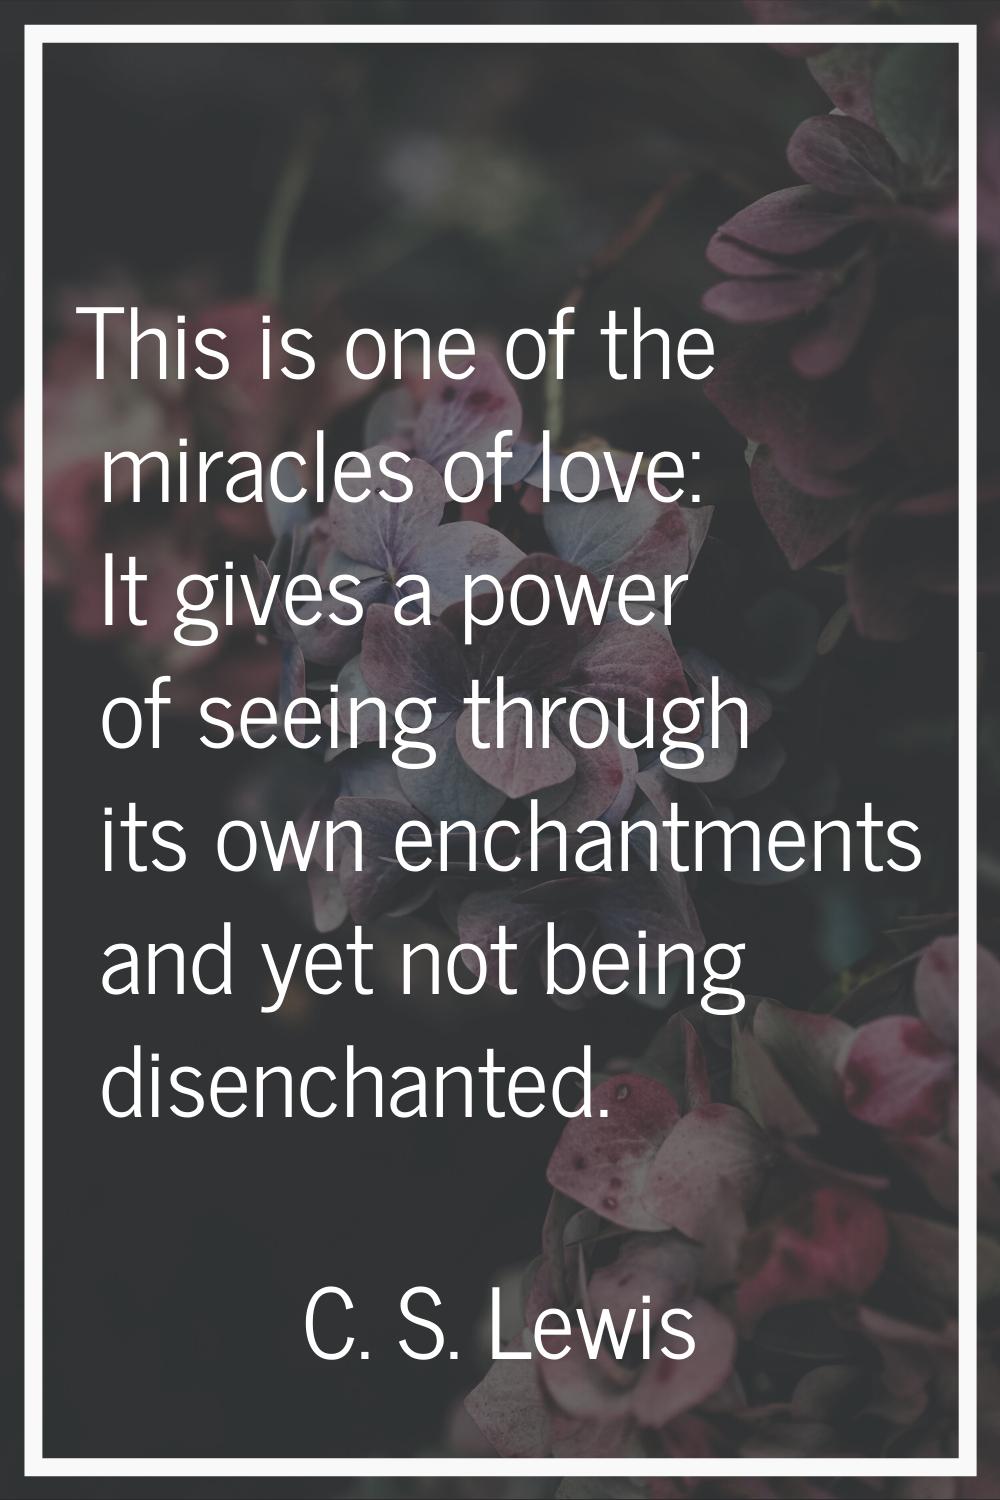 This is one of the miracles of love: It gives a power of seeing through its own enchantments and ye